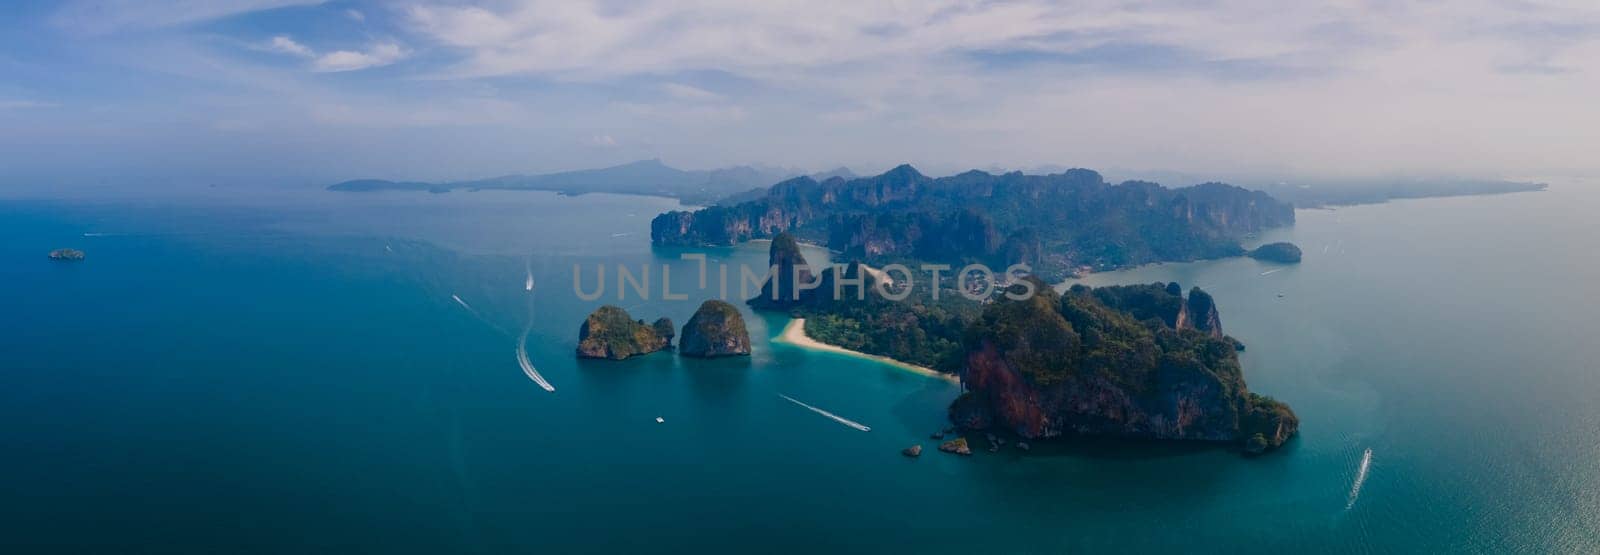 Railay Beach Krabi Thailand,drone view from above at the idyllic Railay Beach in Thailand in the evening at sunset with a cloudy sky